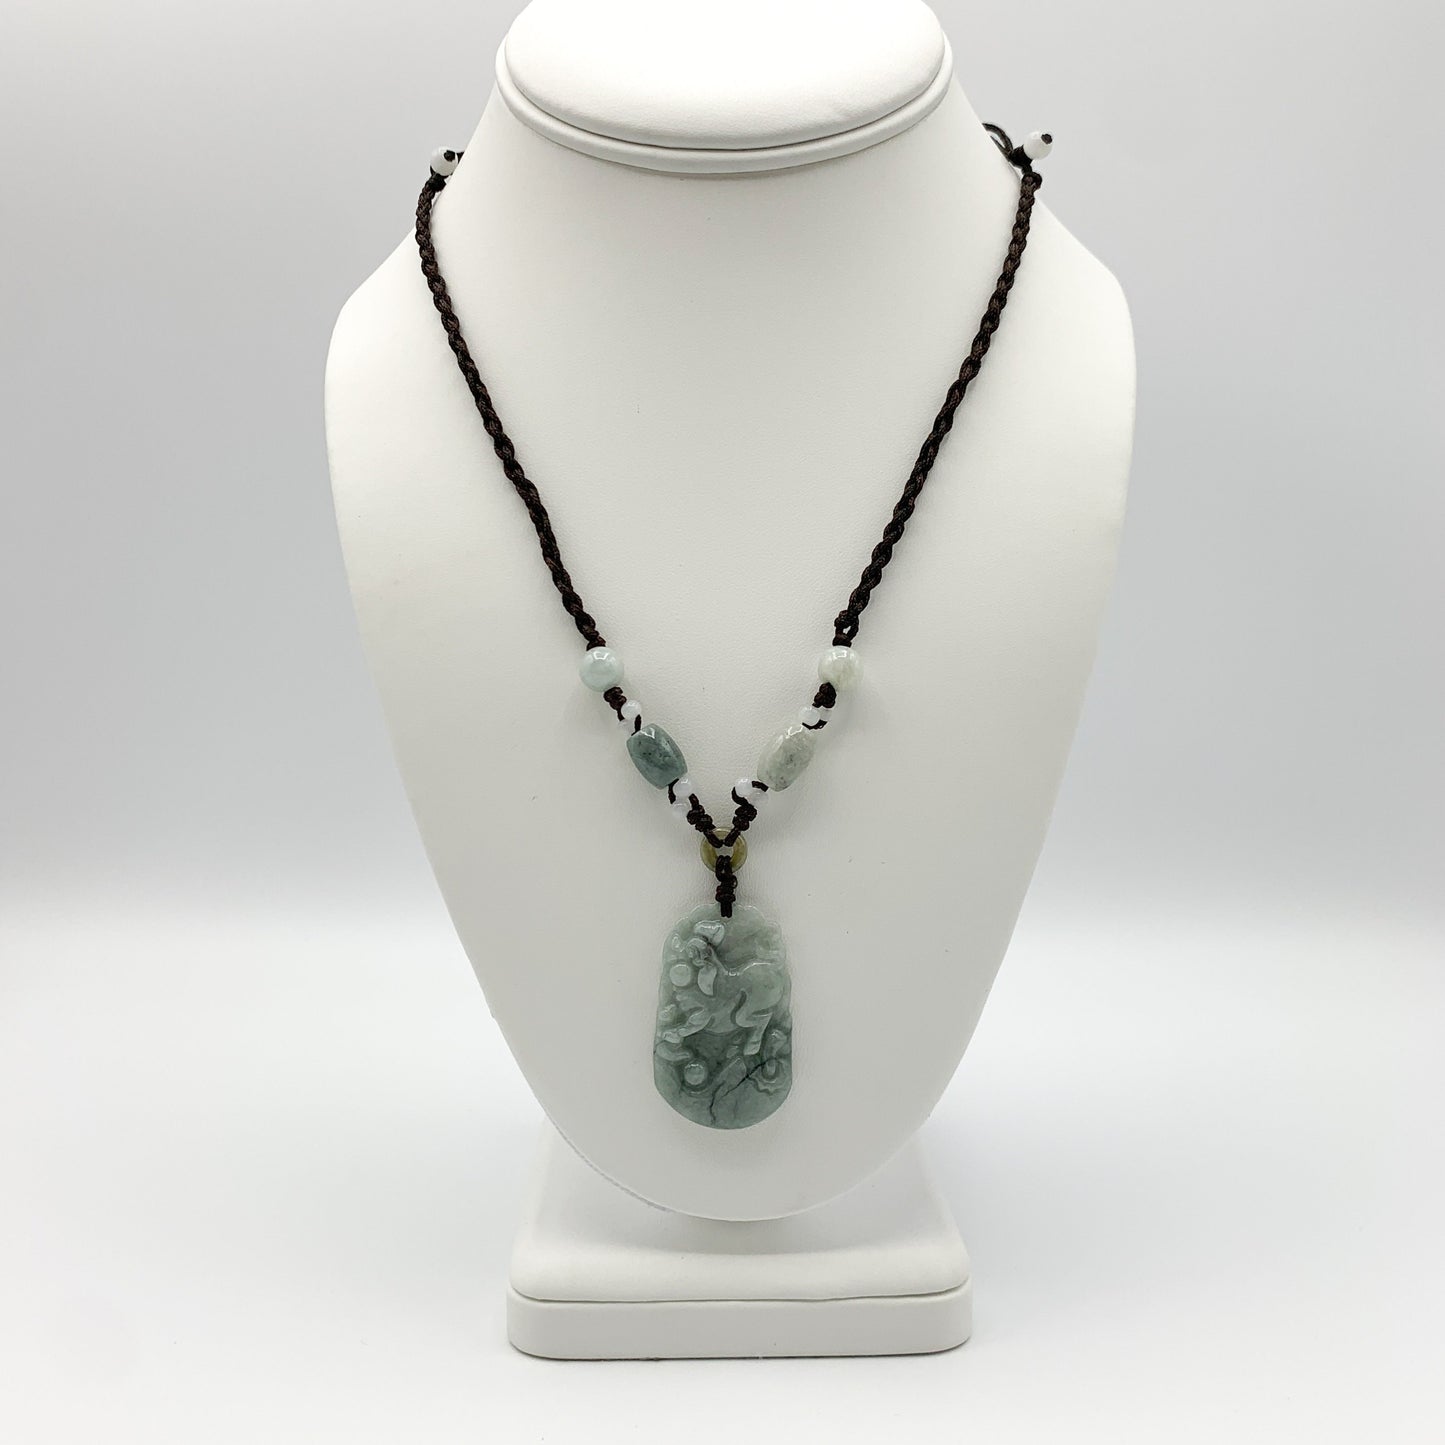 Jadeite Jade Pig Boar Chinese Zodiac Carved Rustic Pendant Necklace, YW-0110-1647059891 - AriaDesignCollection